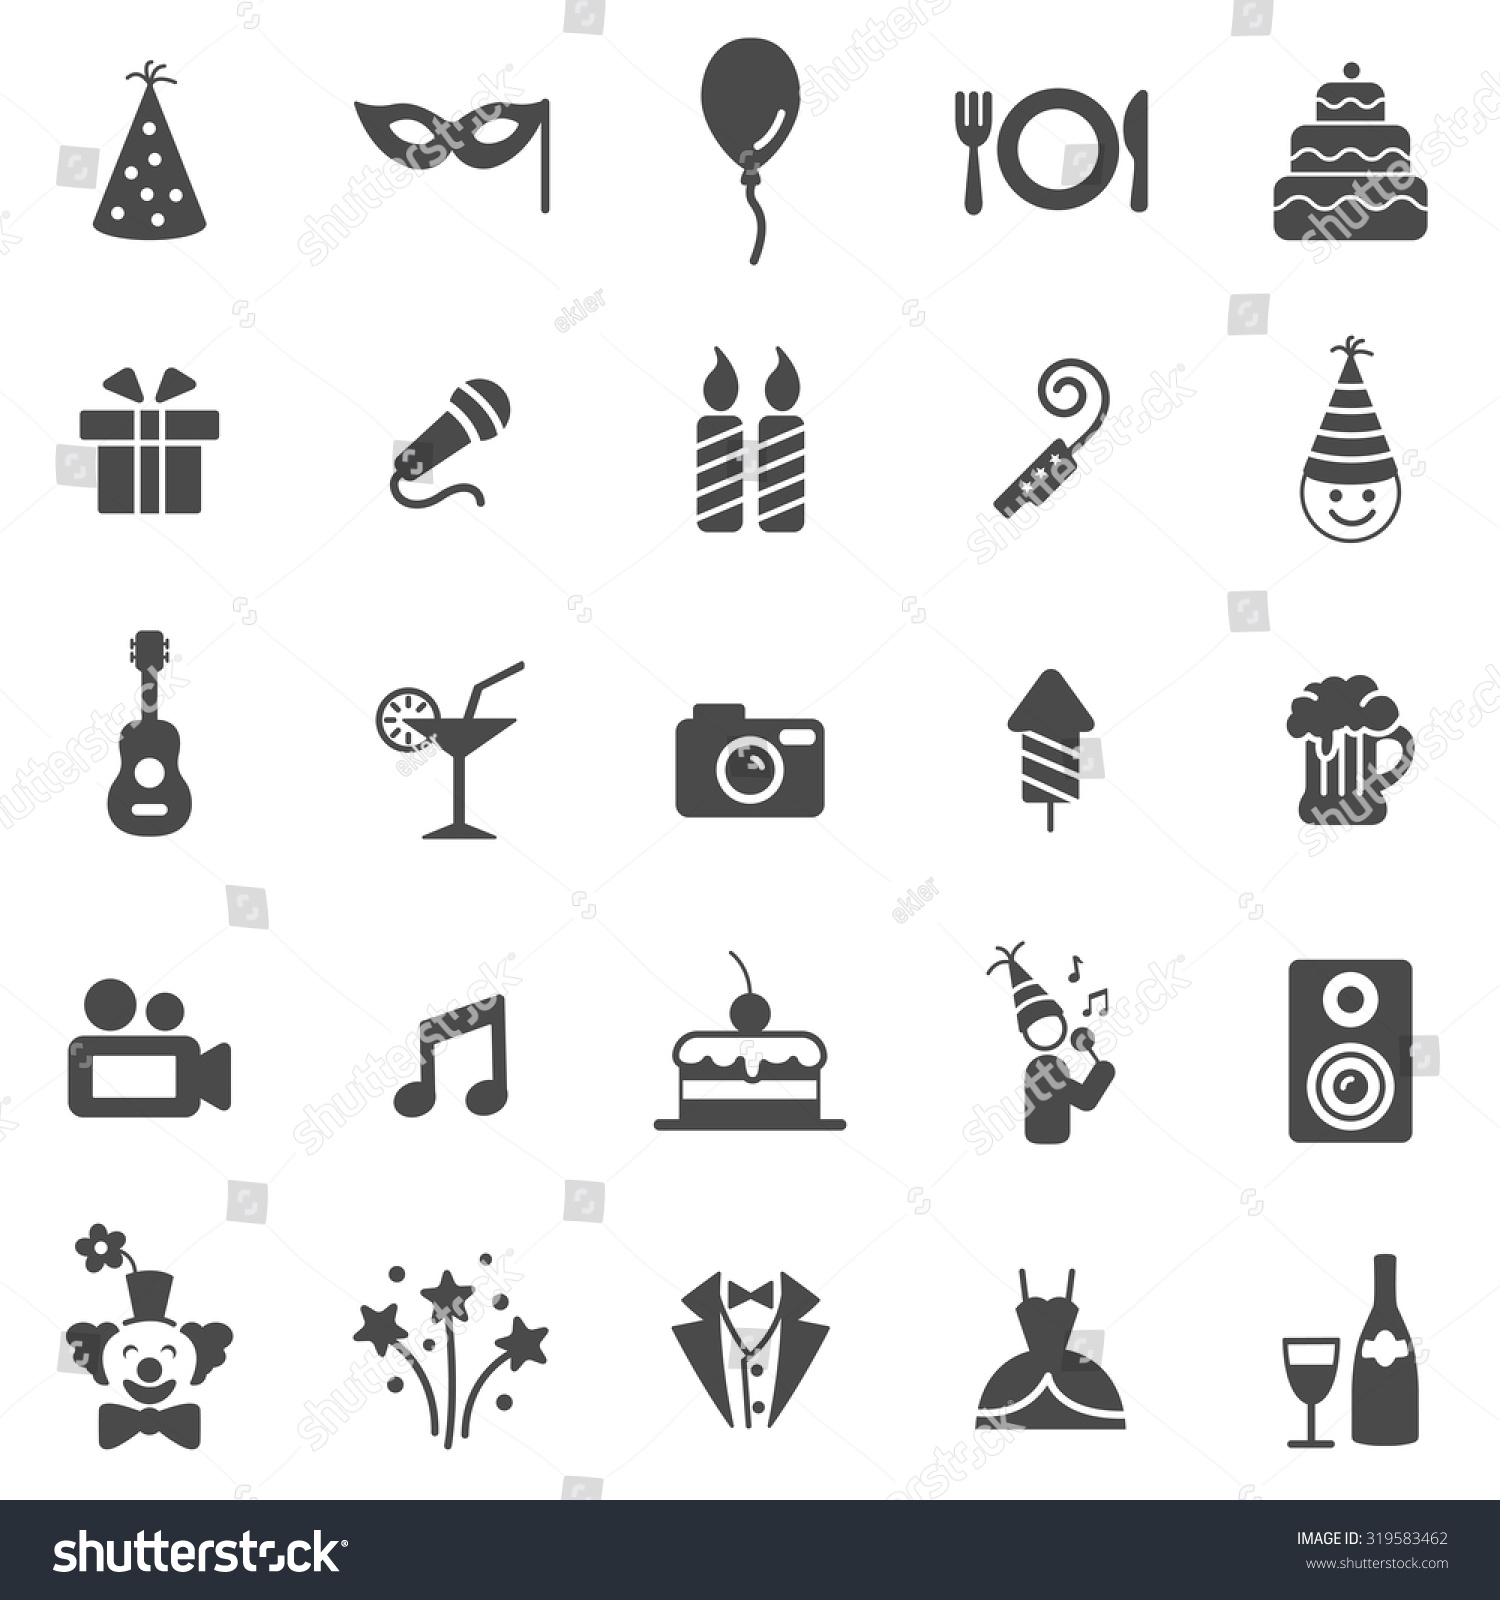 Party Black Icons Set.Vector - 319583462 : Shutterstock